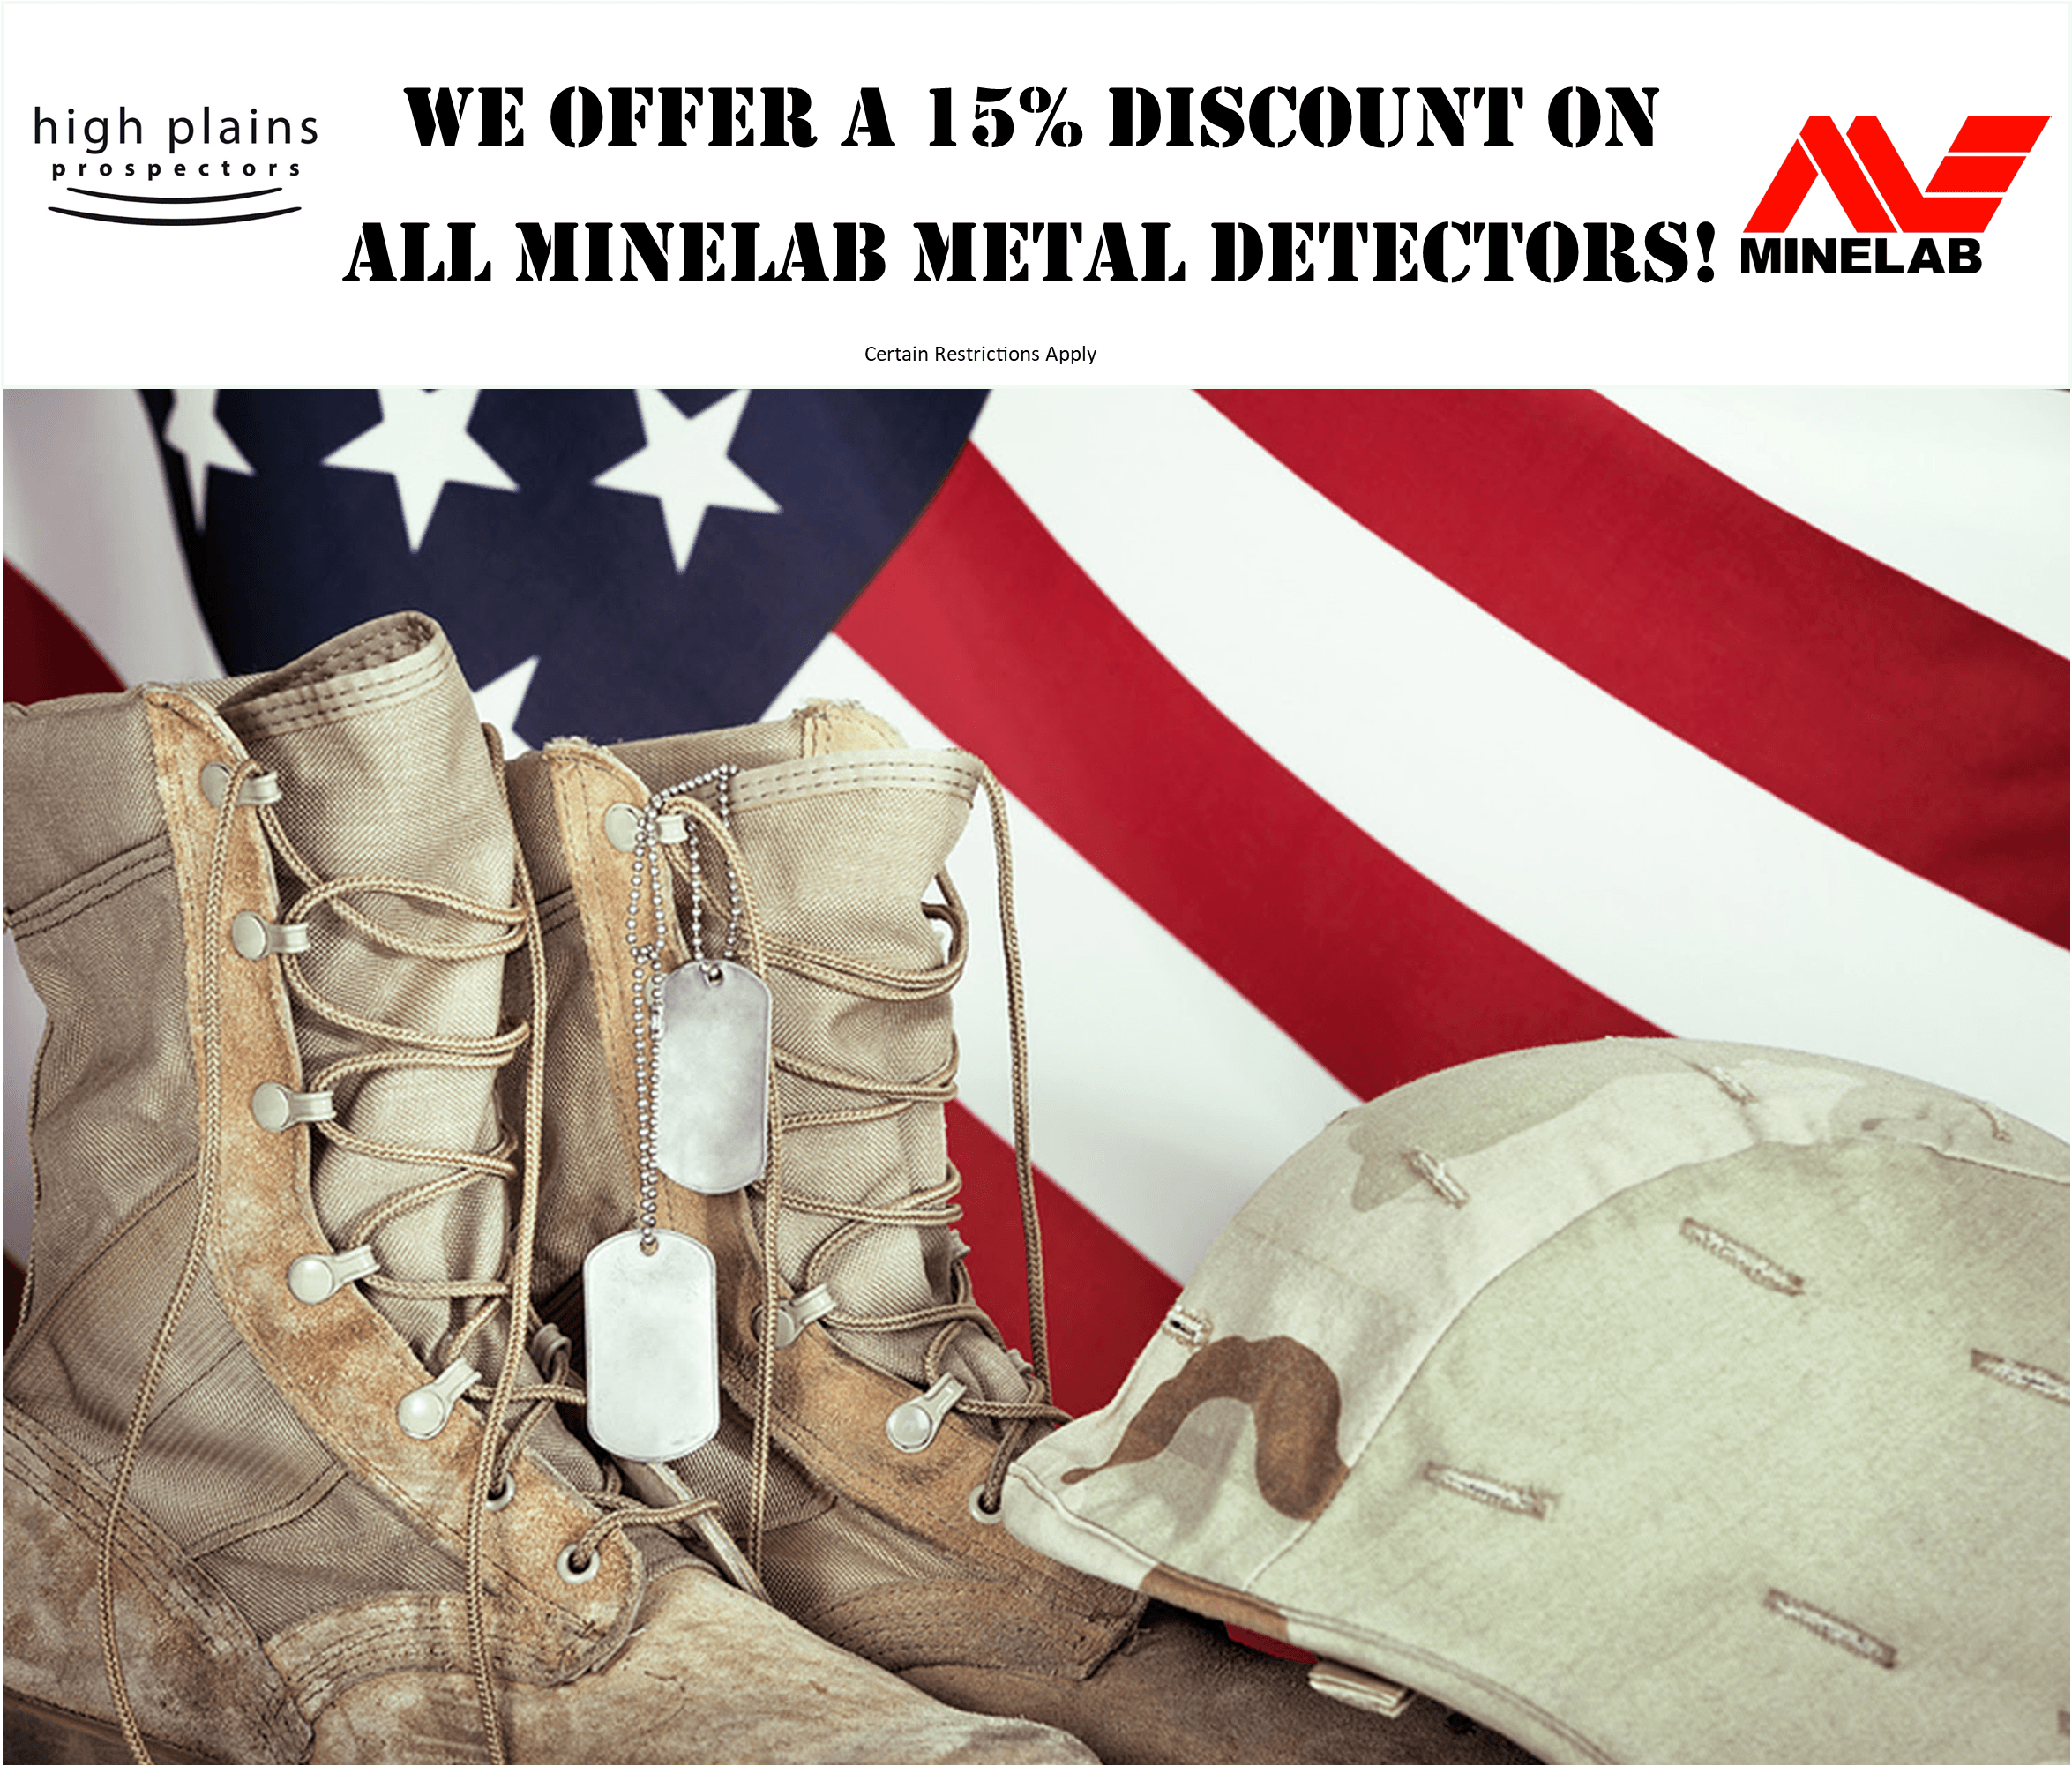 Minelab Military Discount Policy & Acceptable Proof of Military Service